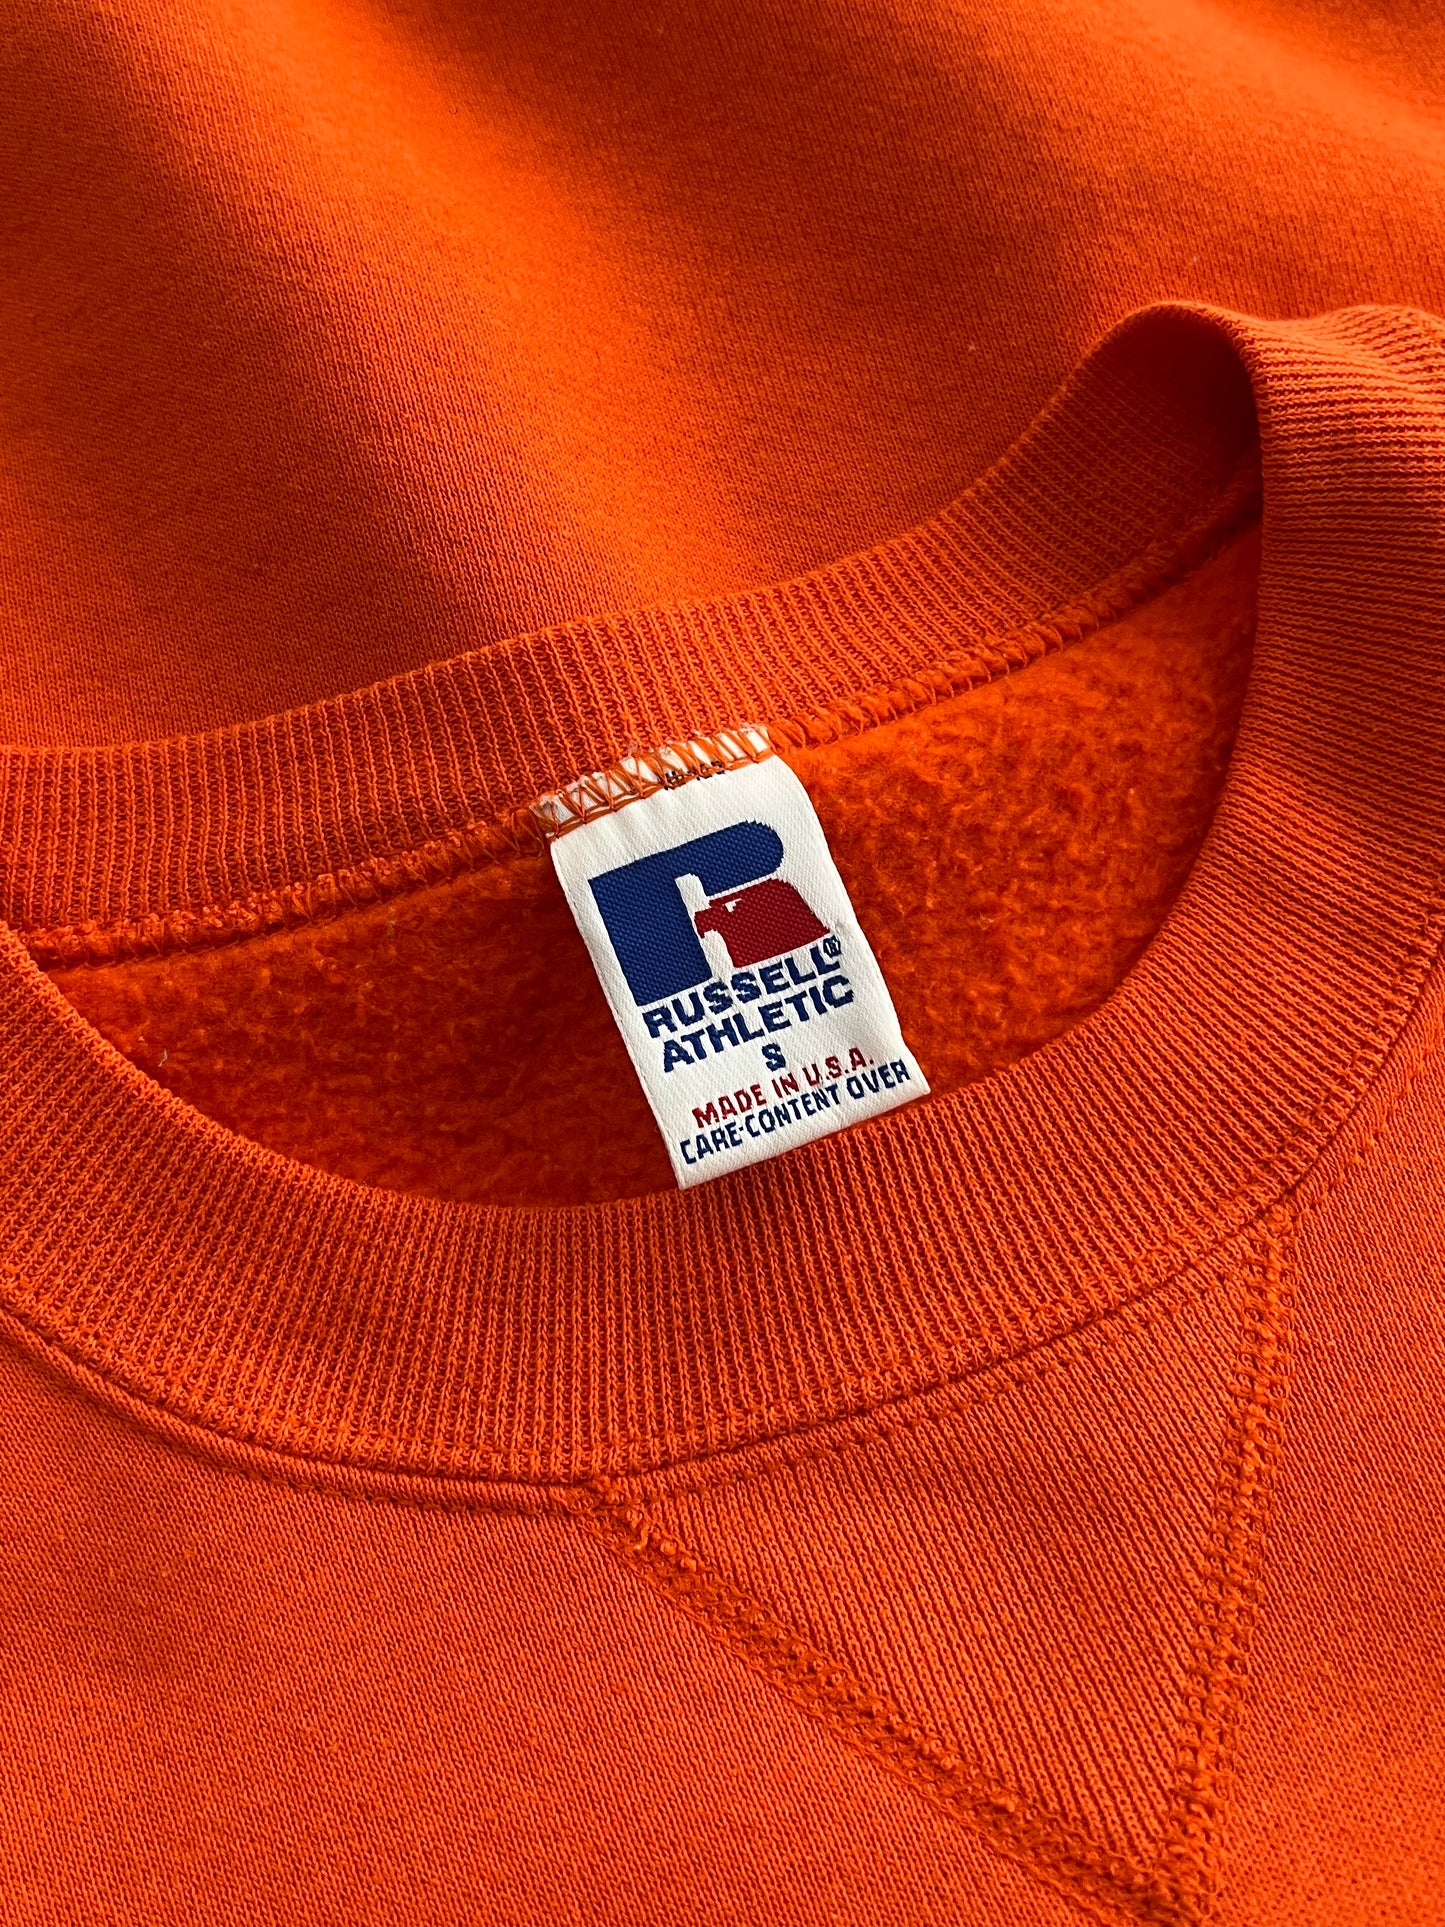 Made In USA Russel Athletic Sweatshirt [M]